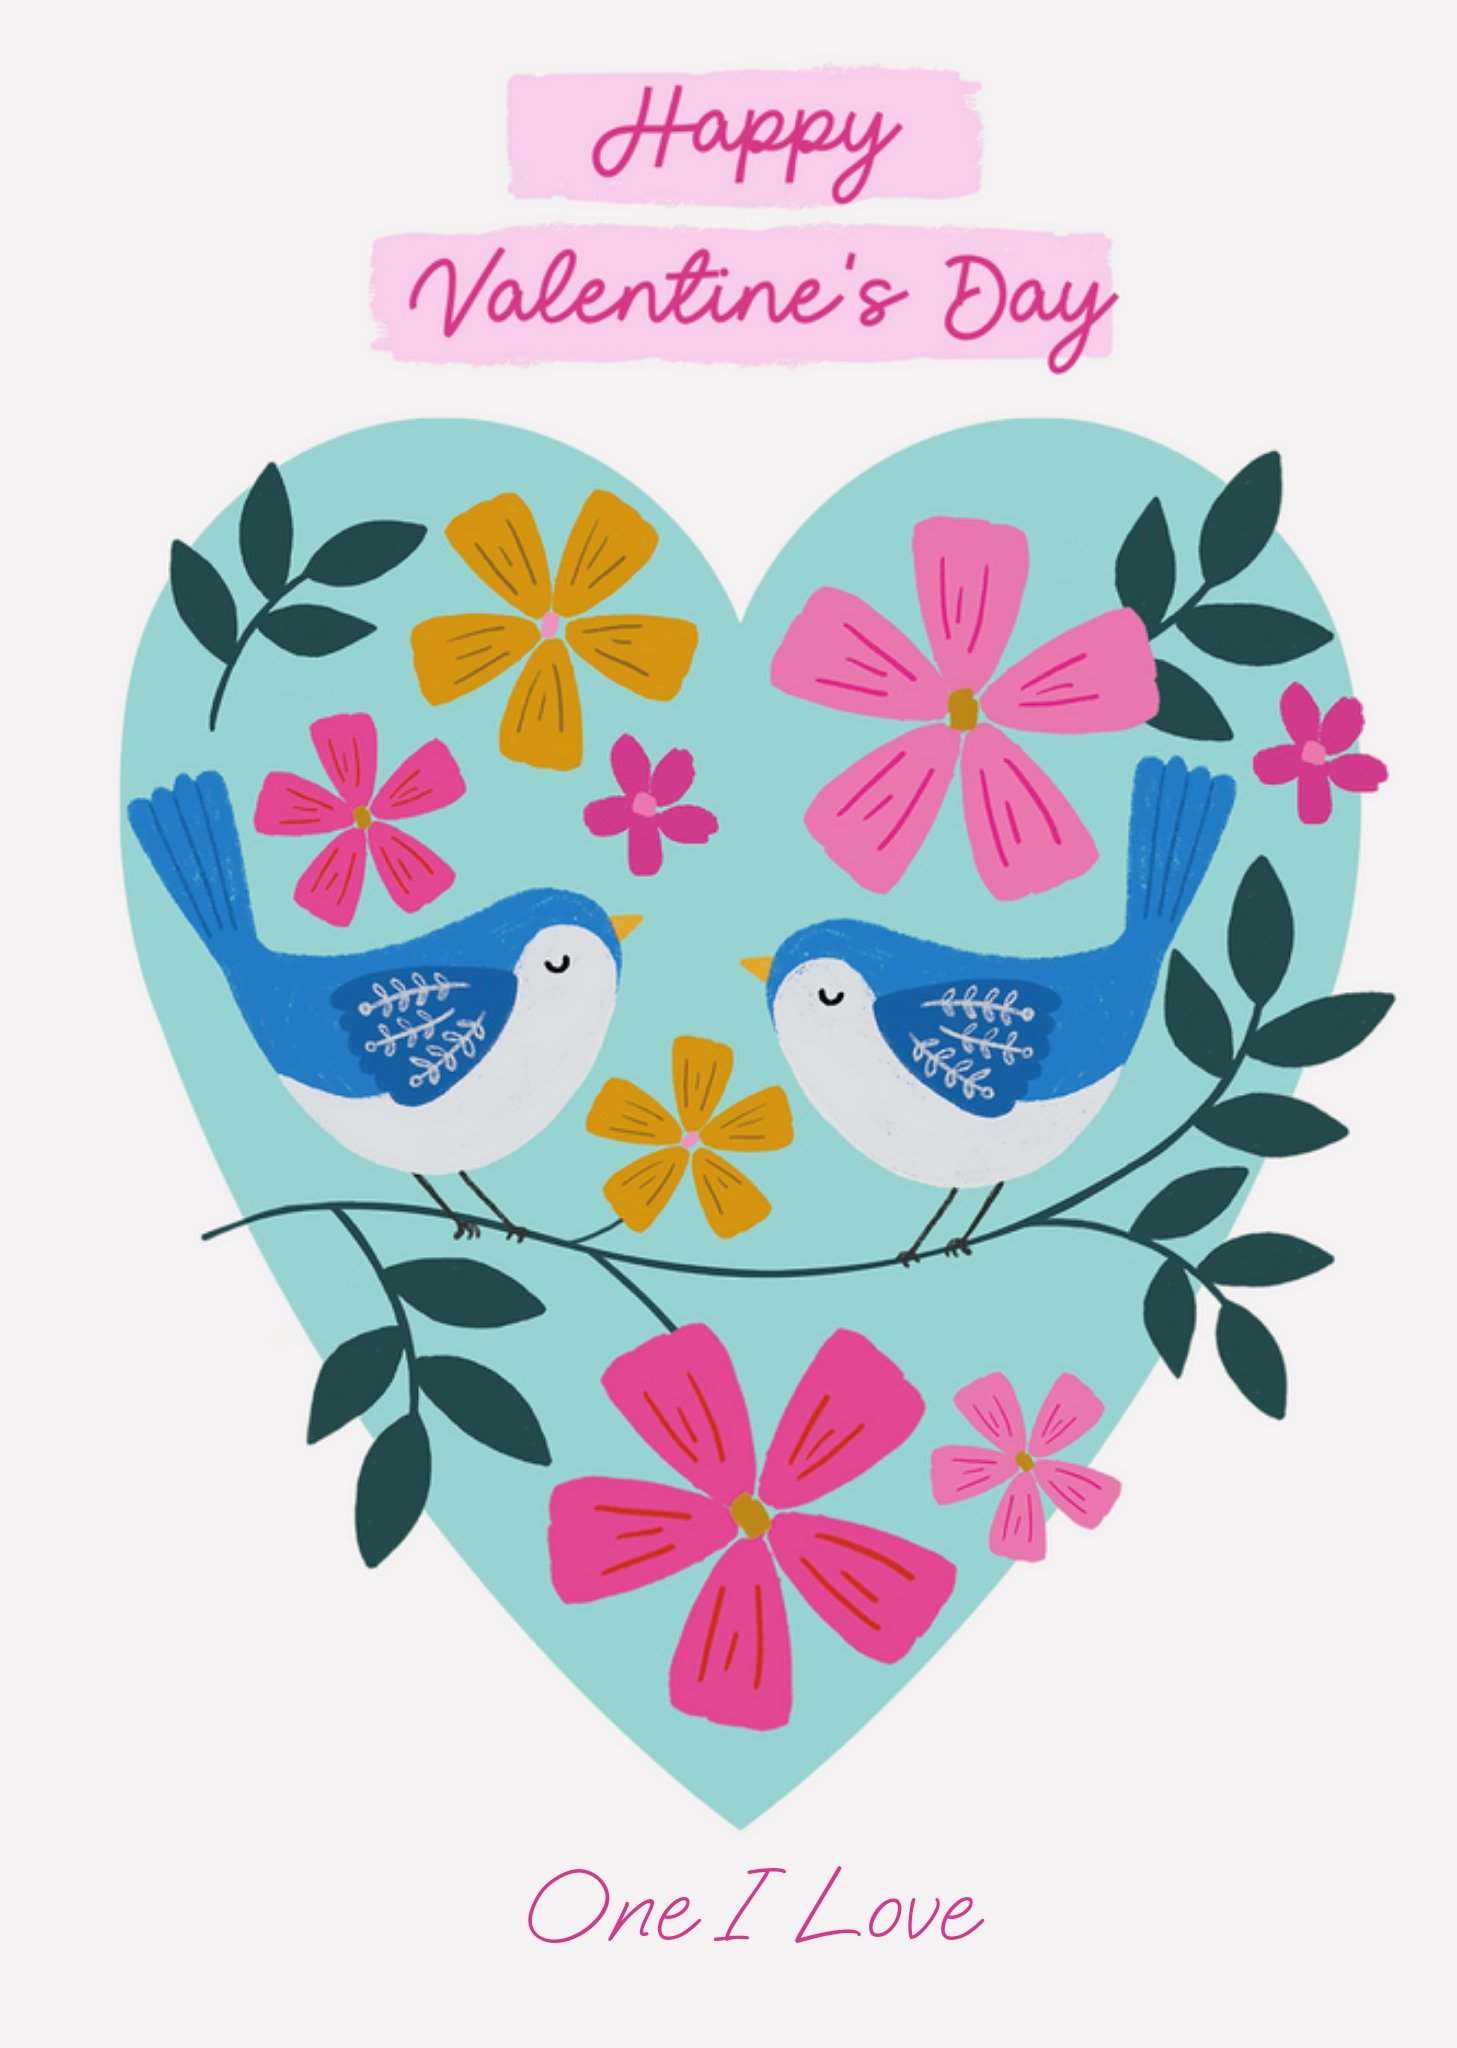 Moonpig Vibrant Sweet Illustrated Love Birds And Flowers Valentine's Day Card, Large